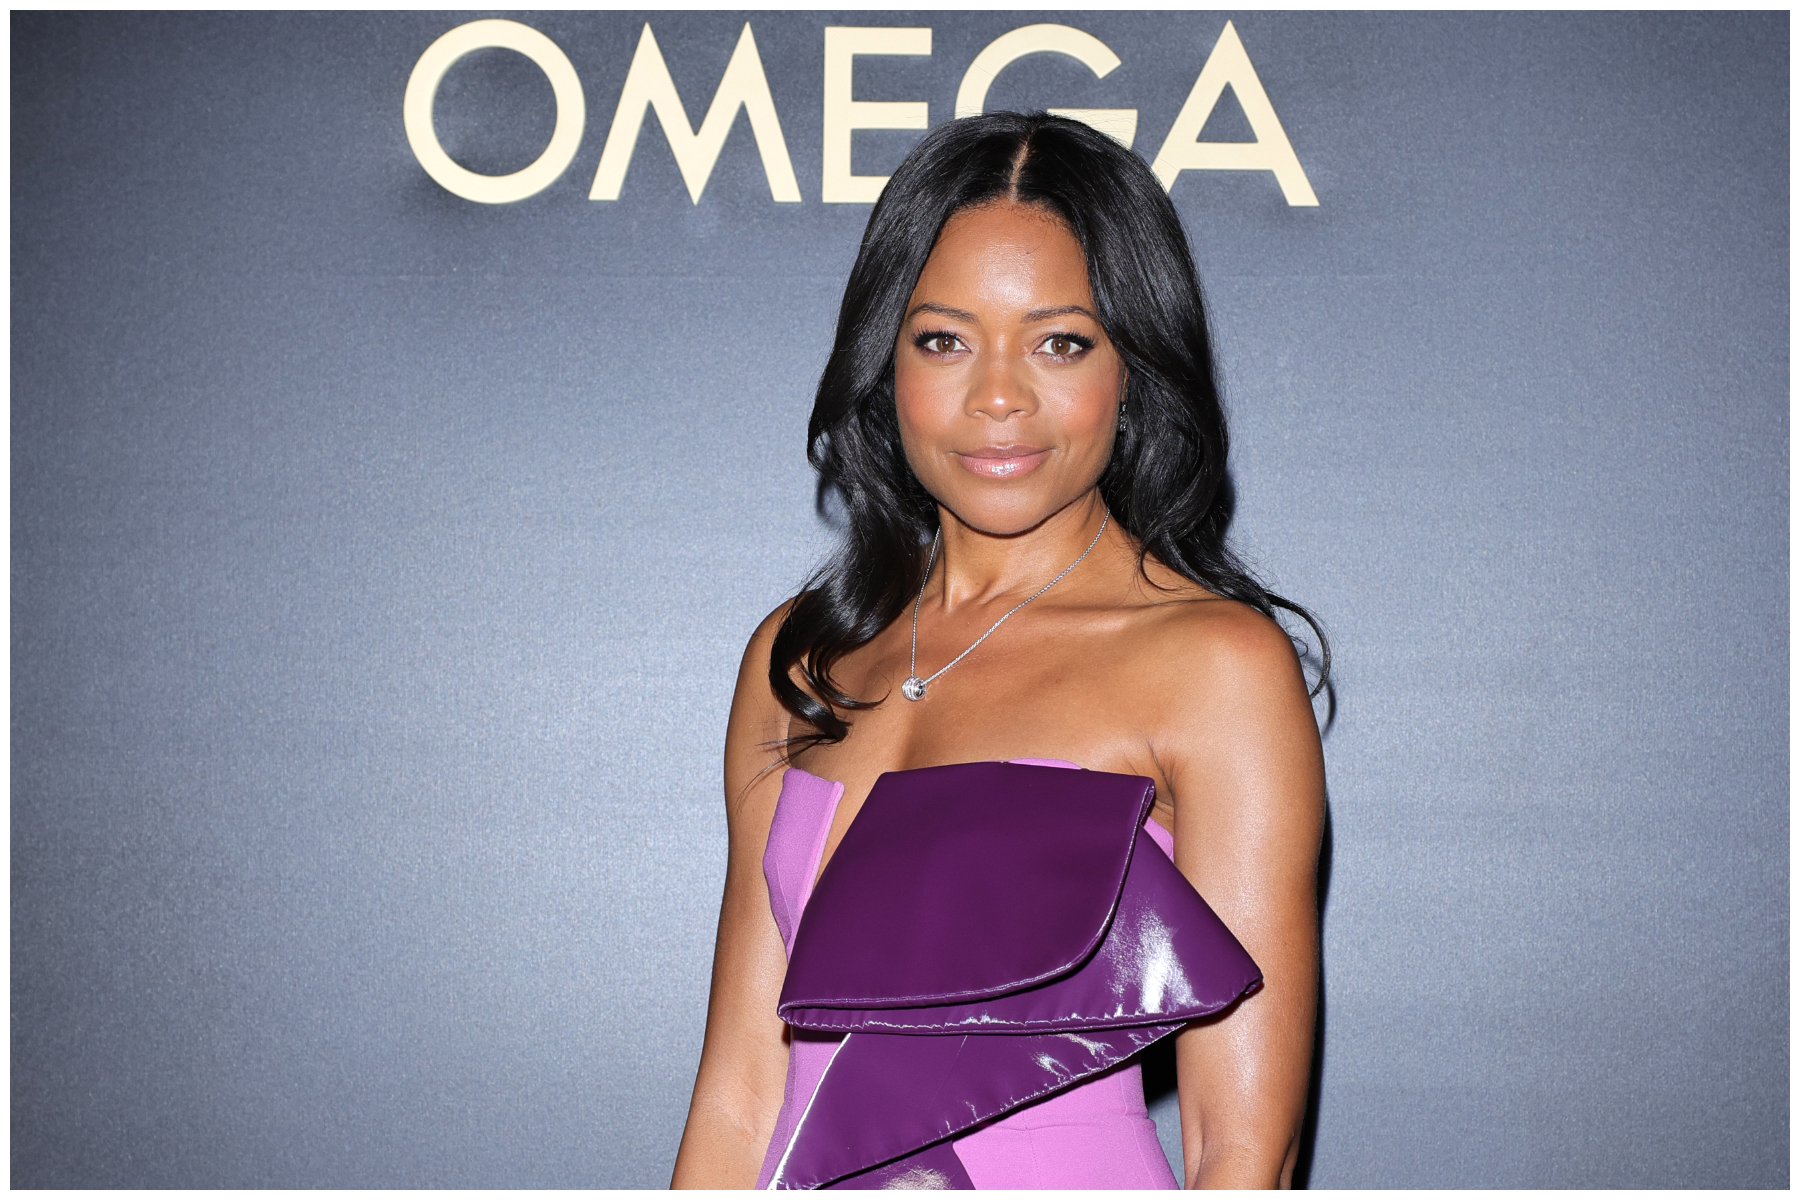 Naomie Harris attends the "Icons Shine with OMEGA in Milan" event at Maka Loft